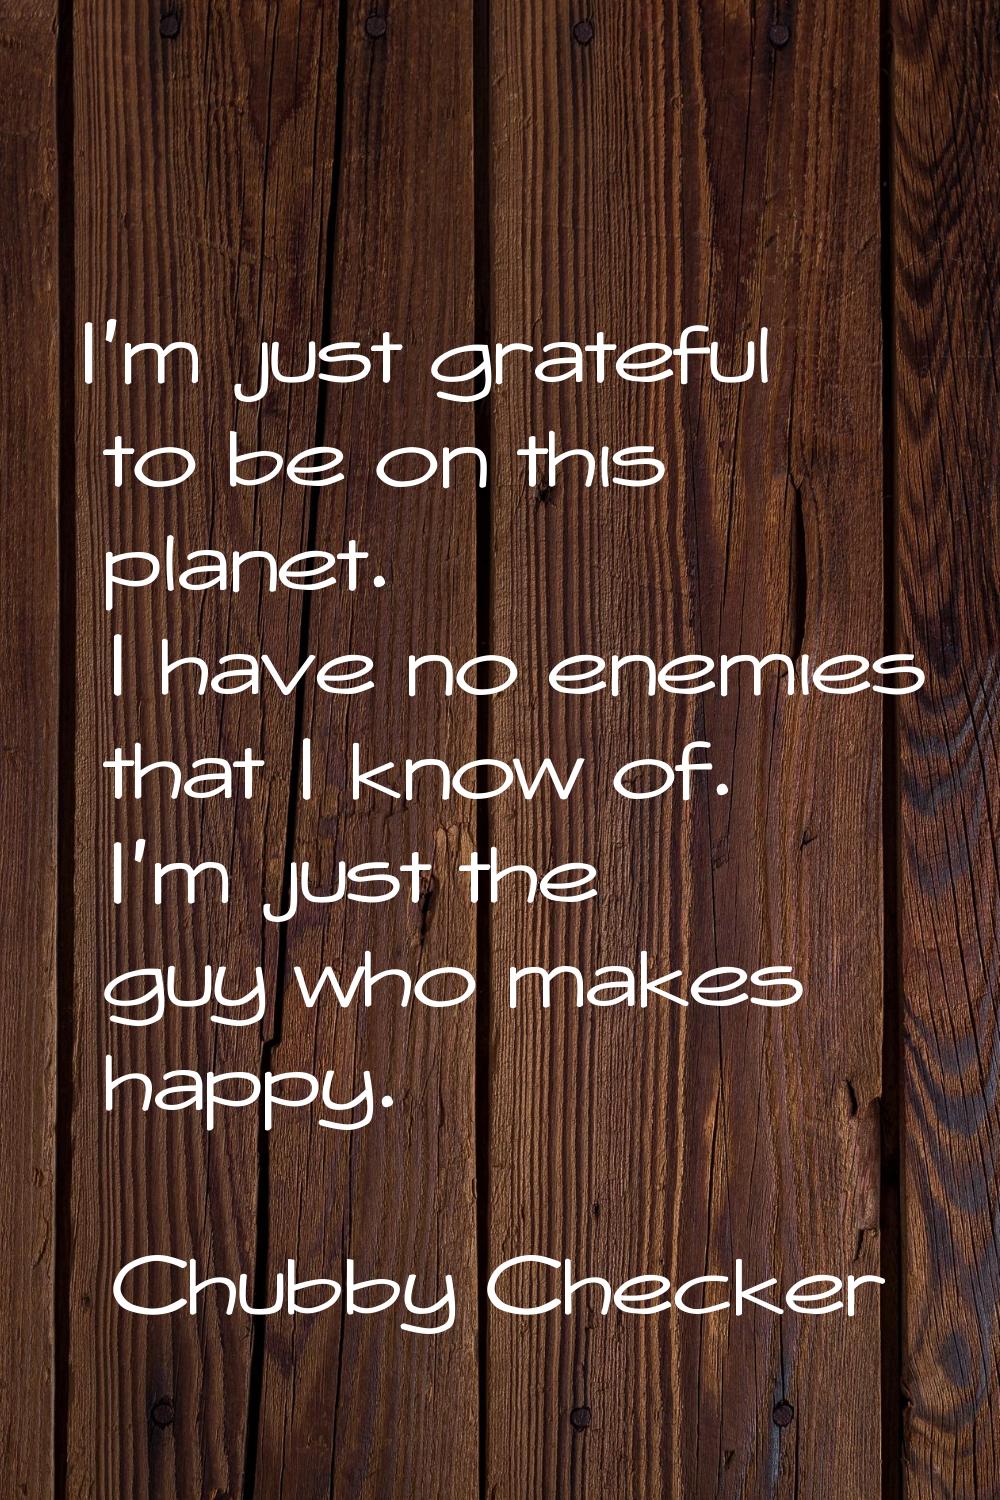 I'm just grateful to be on this planet. I have no enemies that I know of. I'm just the guy who make